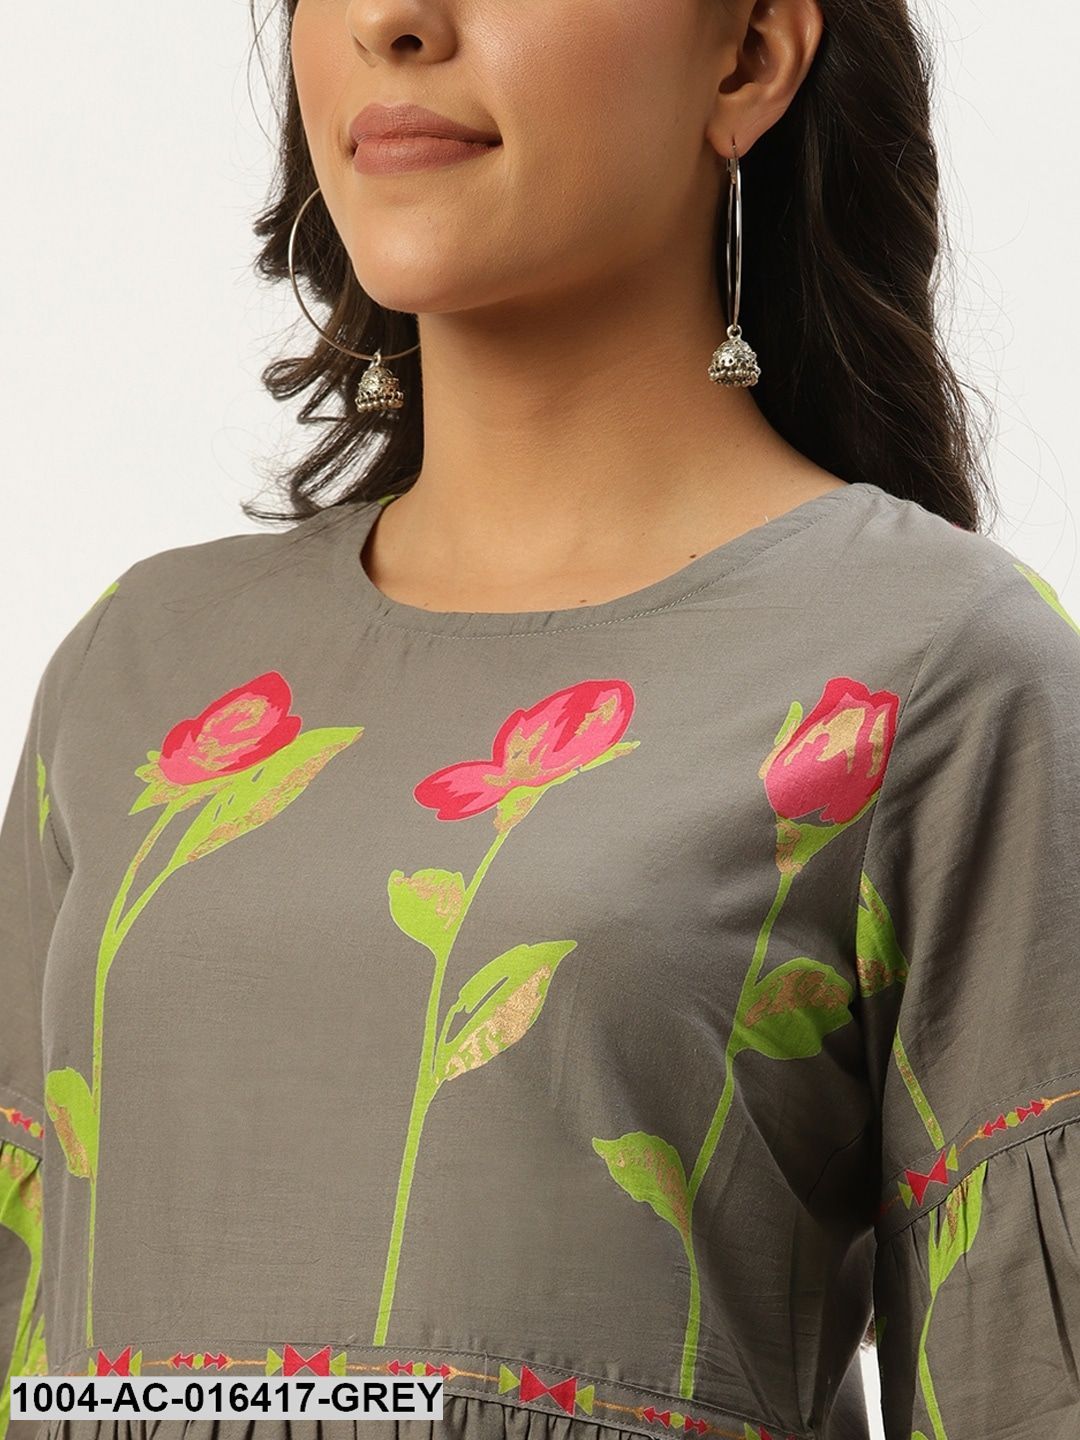 Grey Floral Printed Round Neck Cotton A-Line Dress